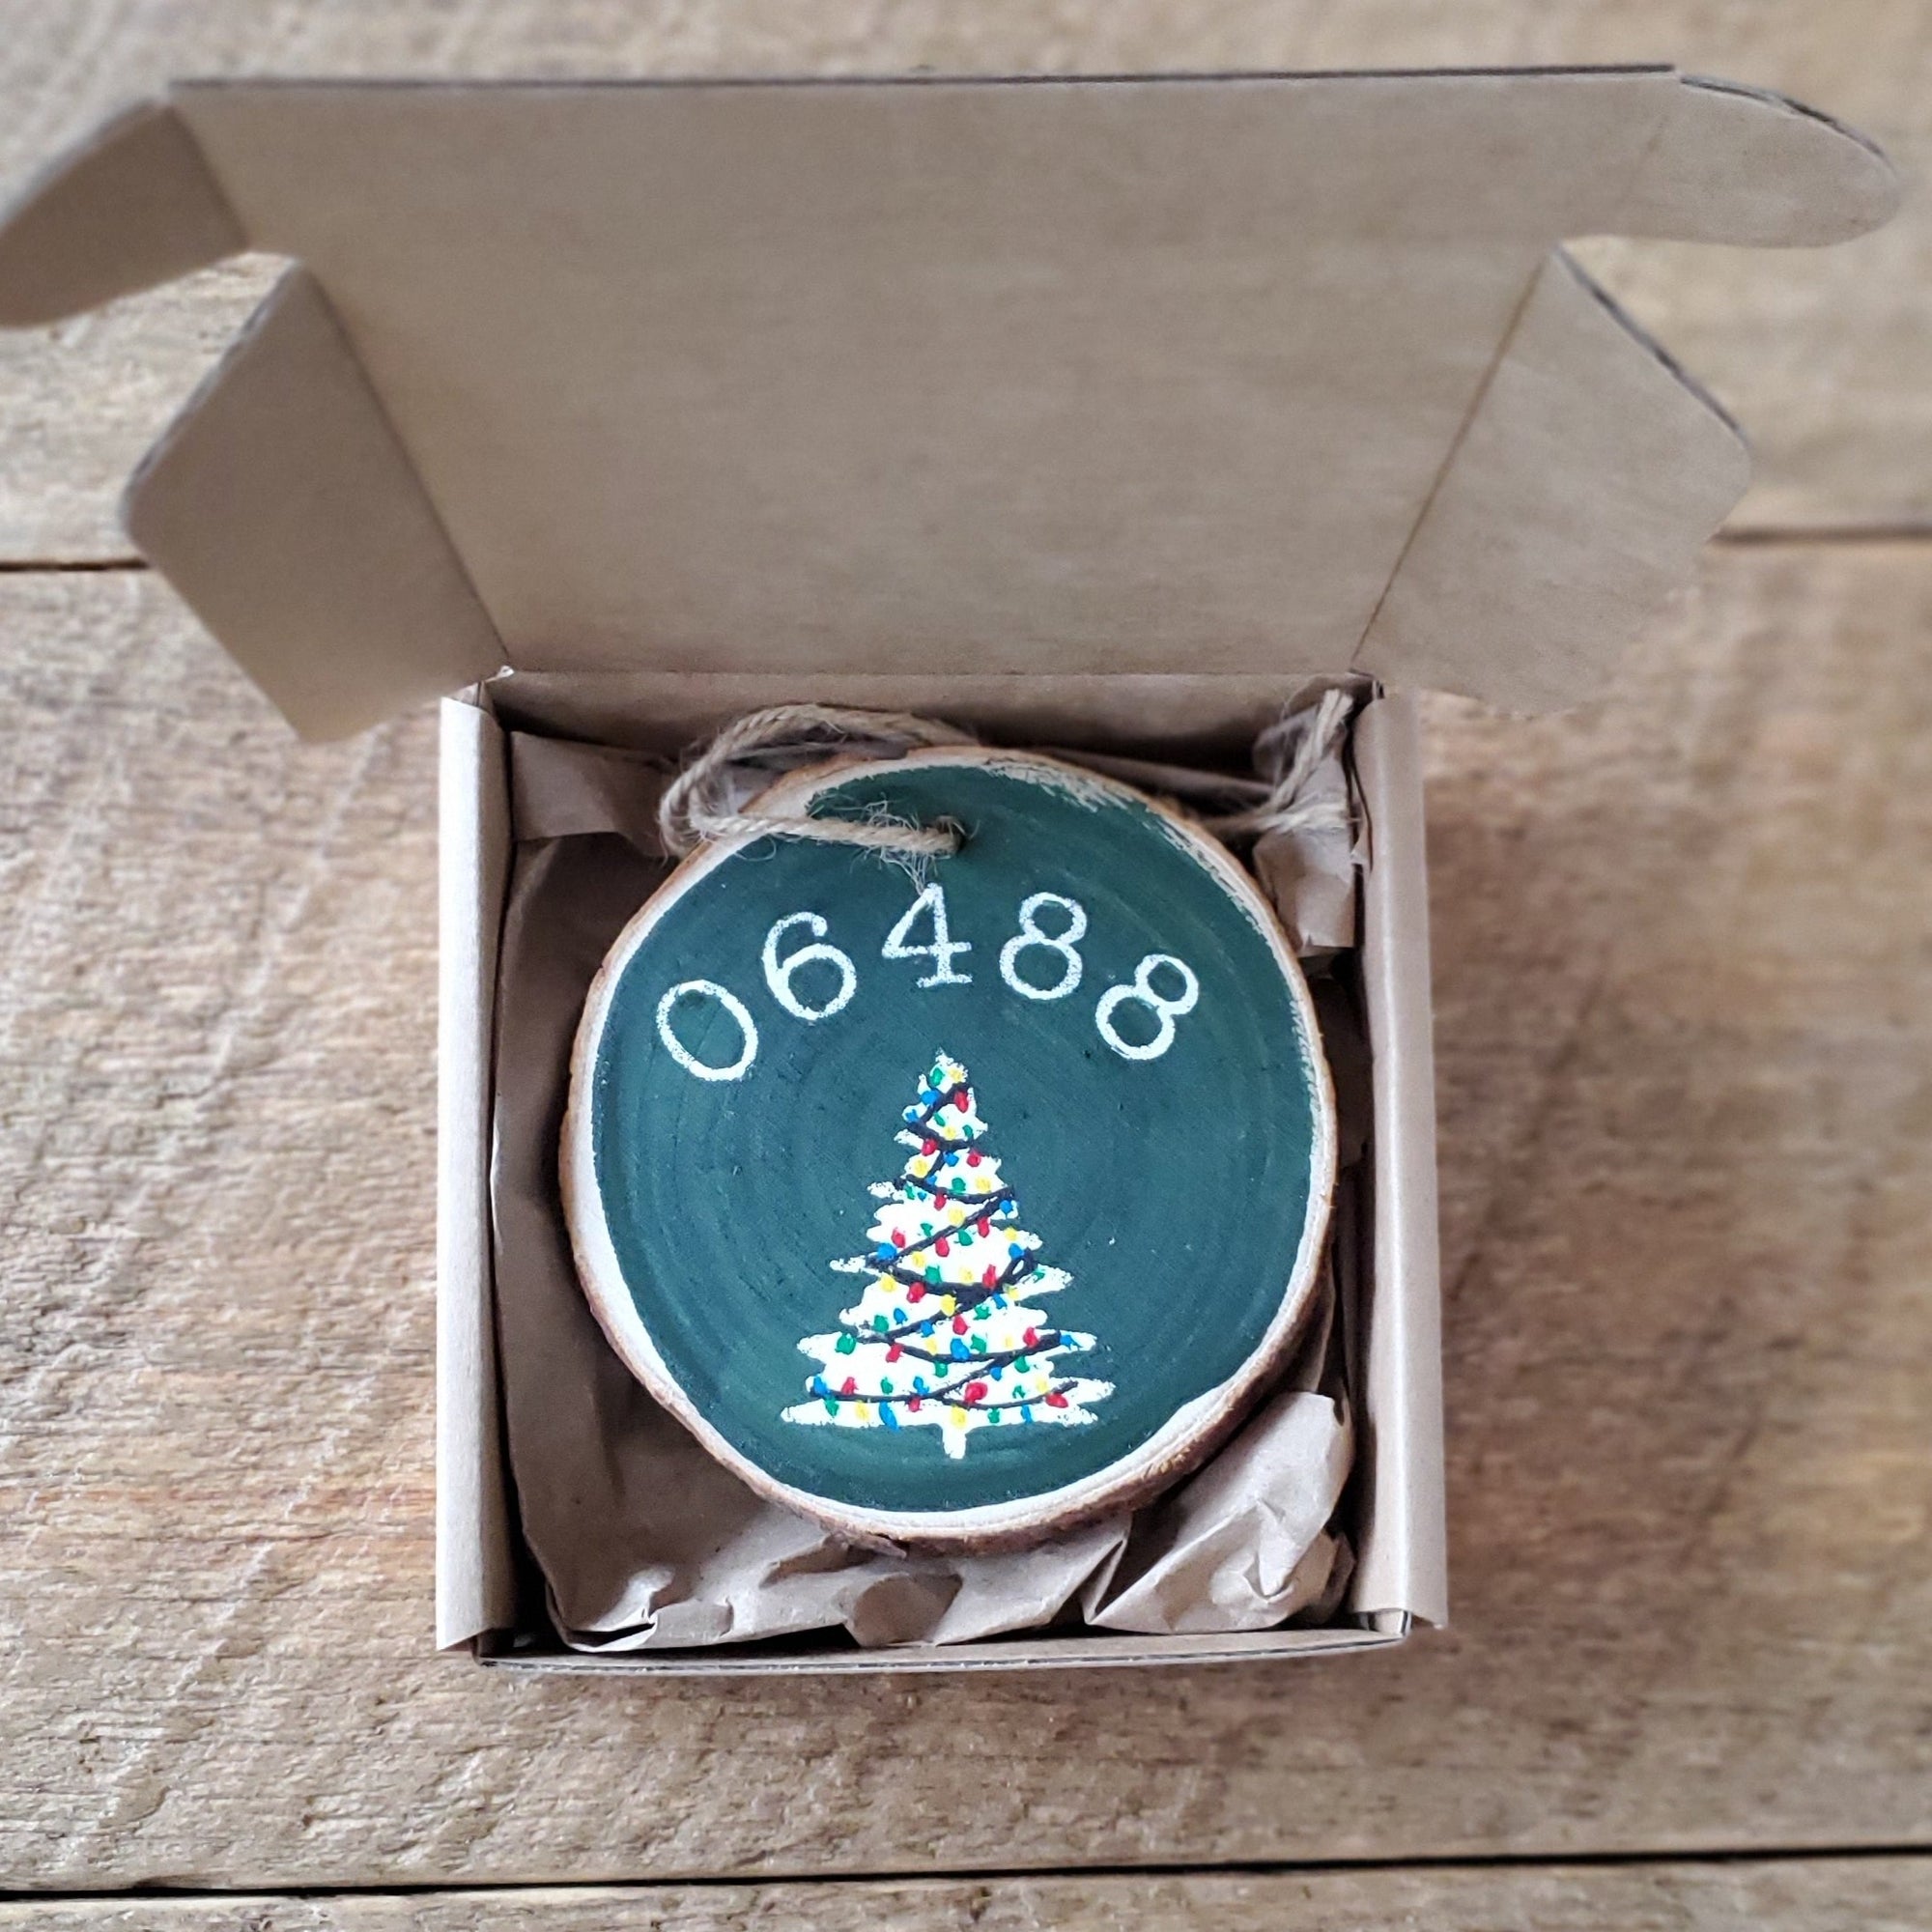 Custom Holiday Christmas Ornament with Zip Code and Christmas Tree with lights. Personalize with zip code